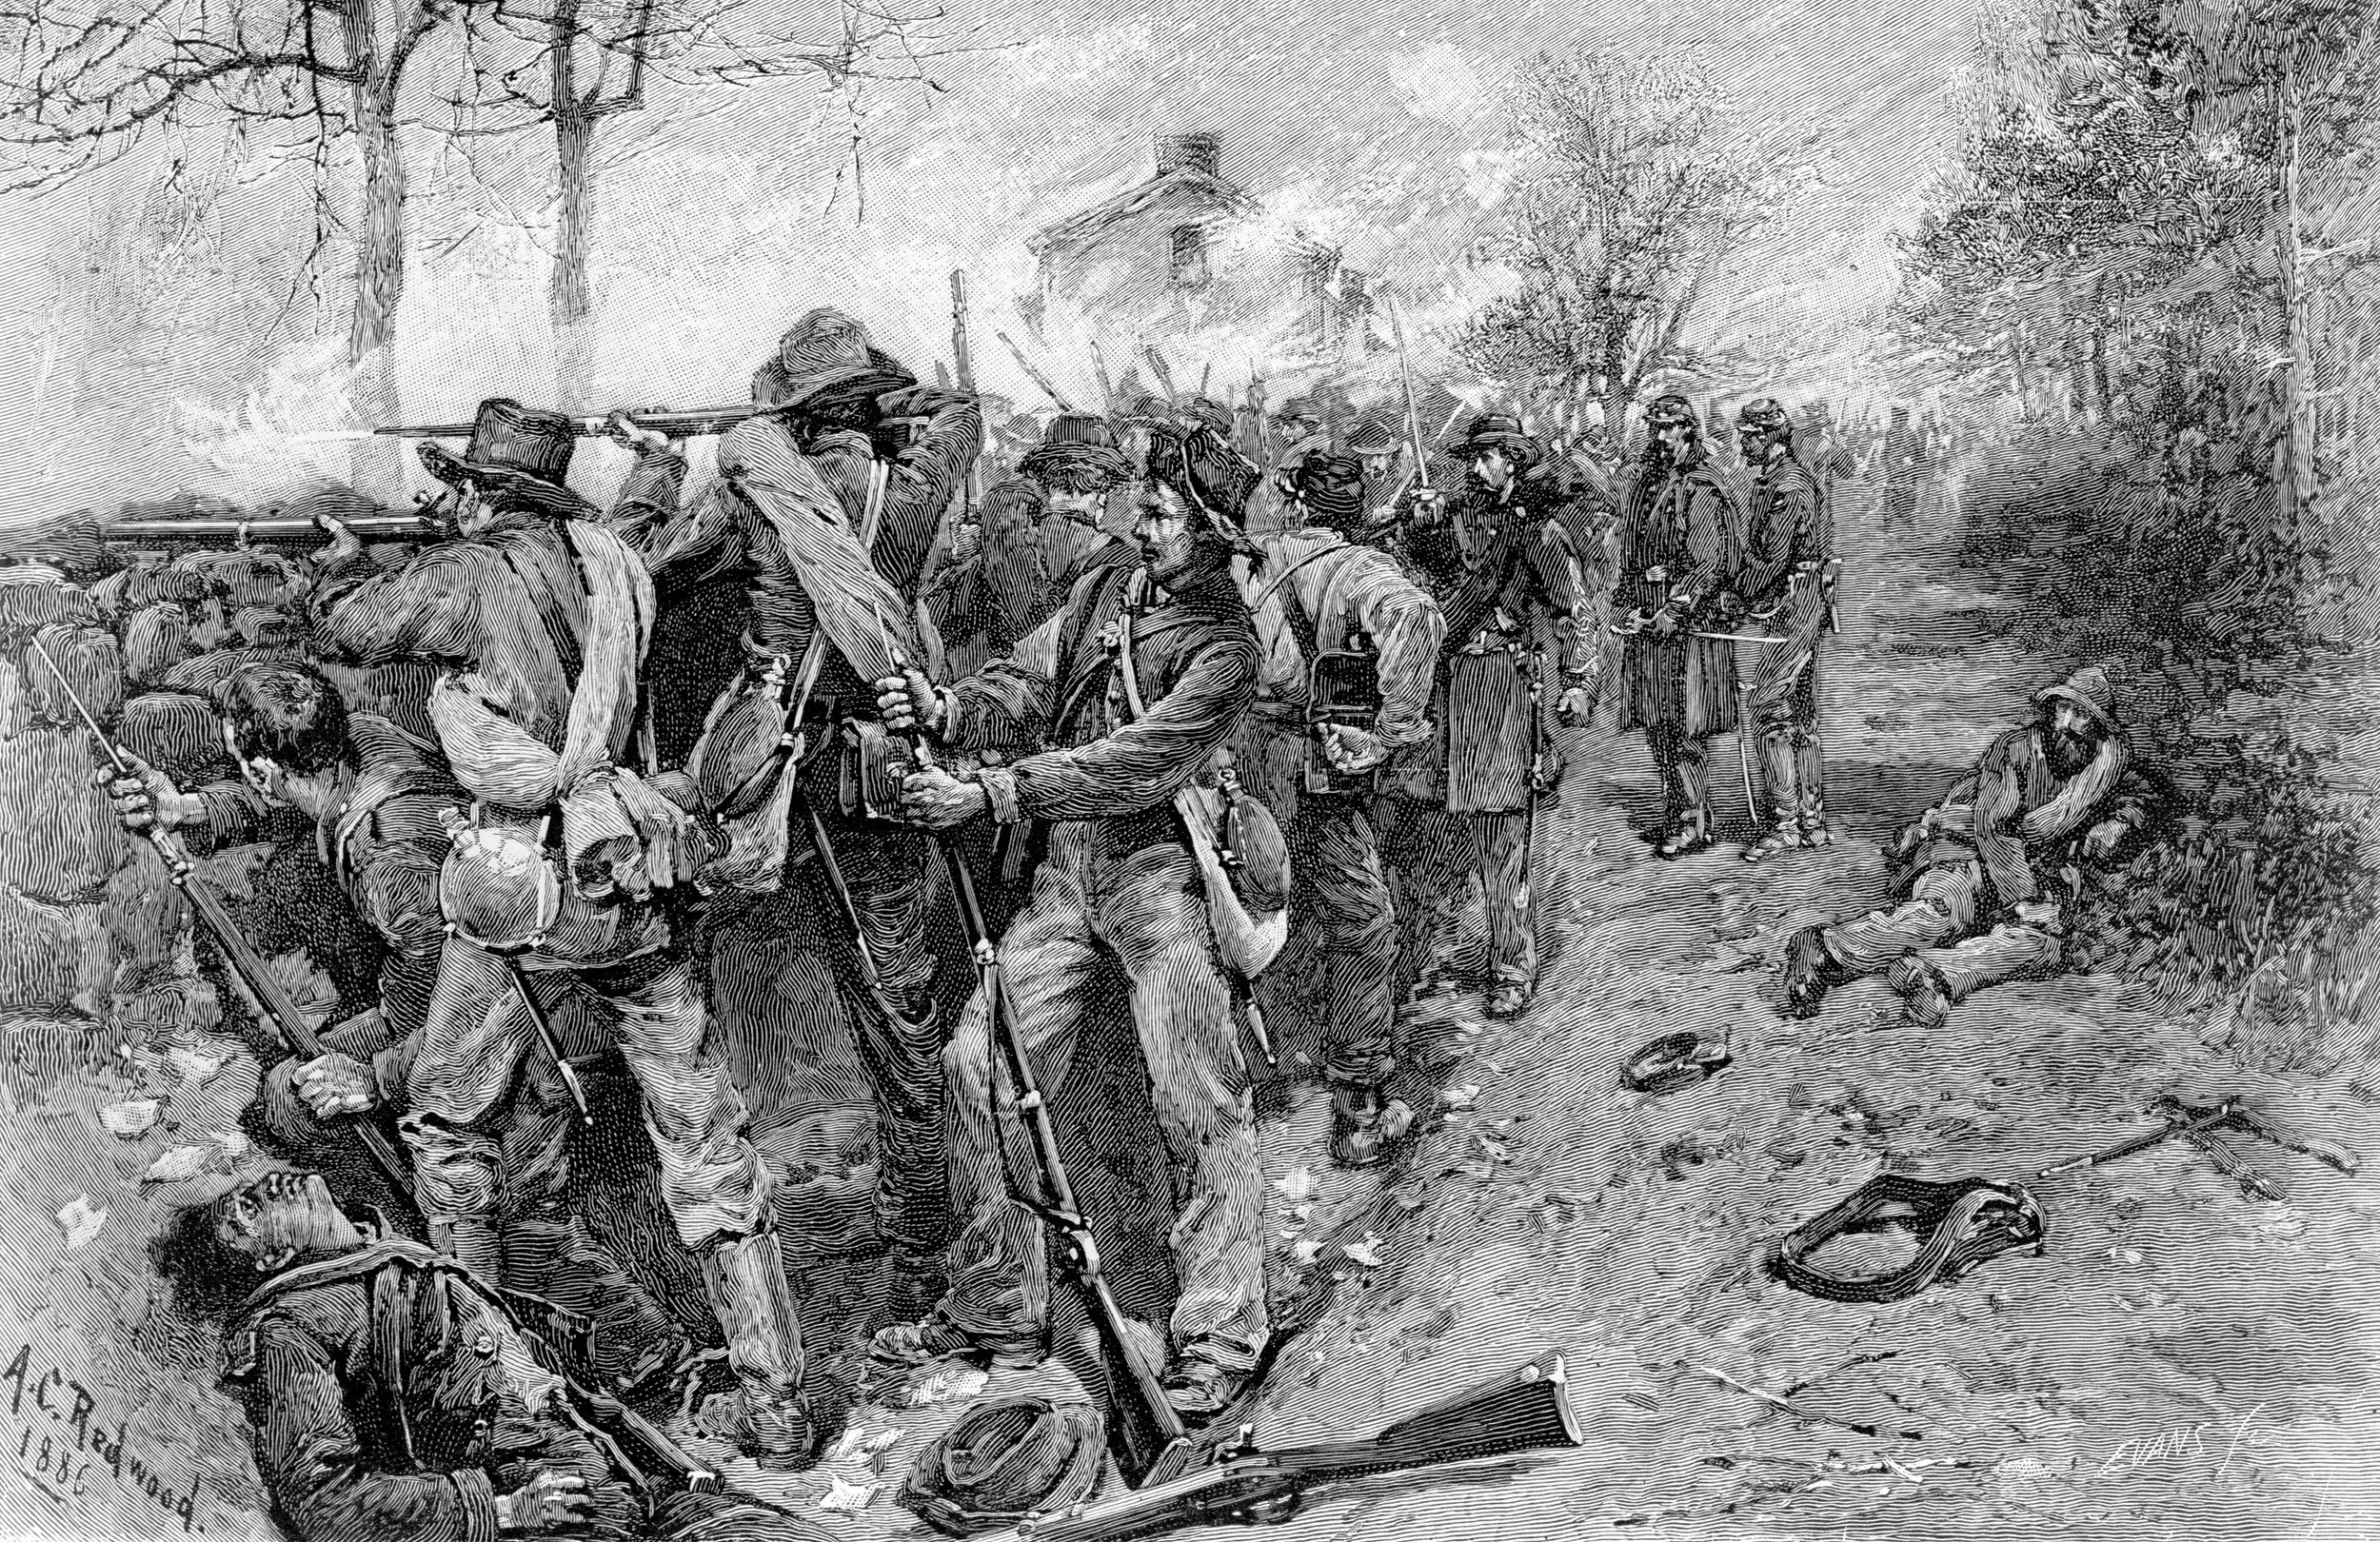 Deadeye Confederate marksmen under Brigadier Generals Thomas Cobb and Joseph Kershaw pepper Union attackers from behind the stone wall on Marye’s Heights. 